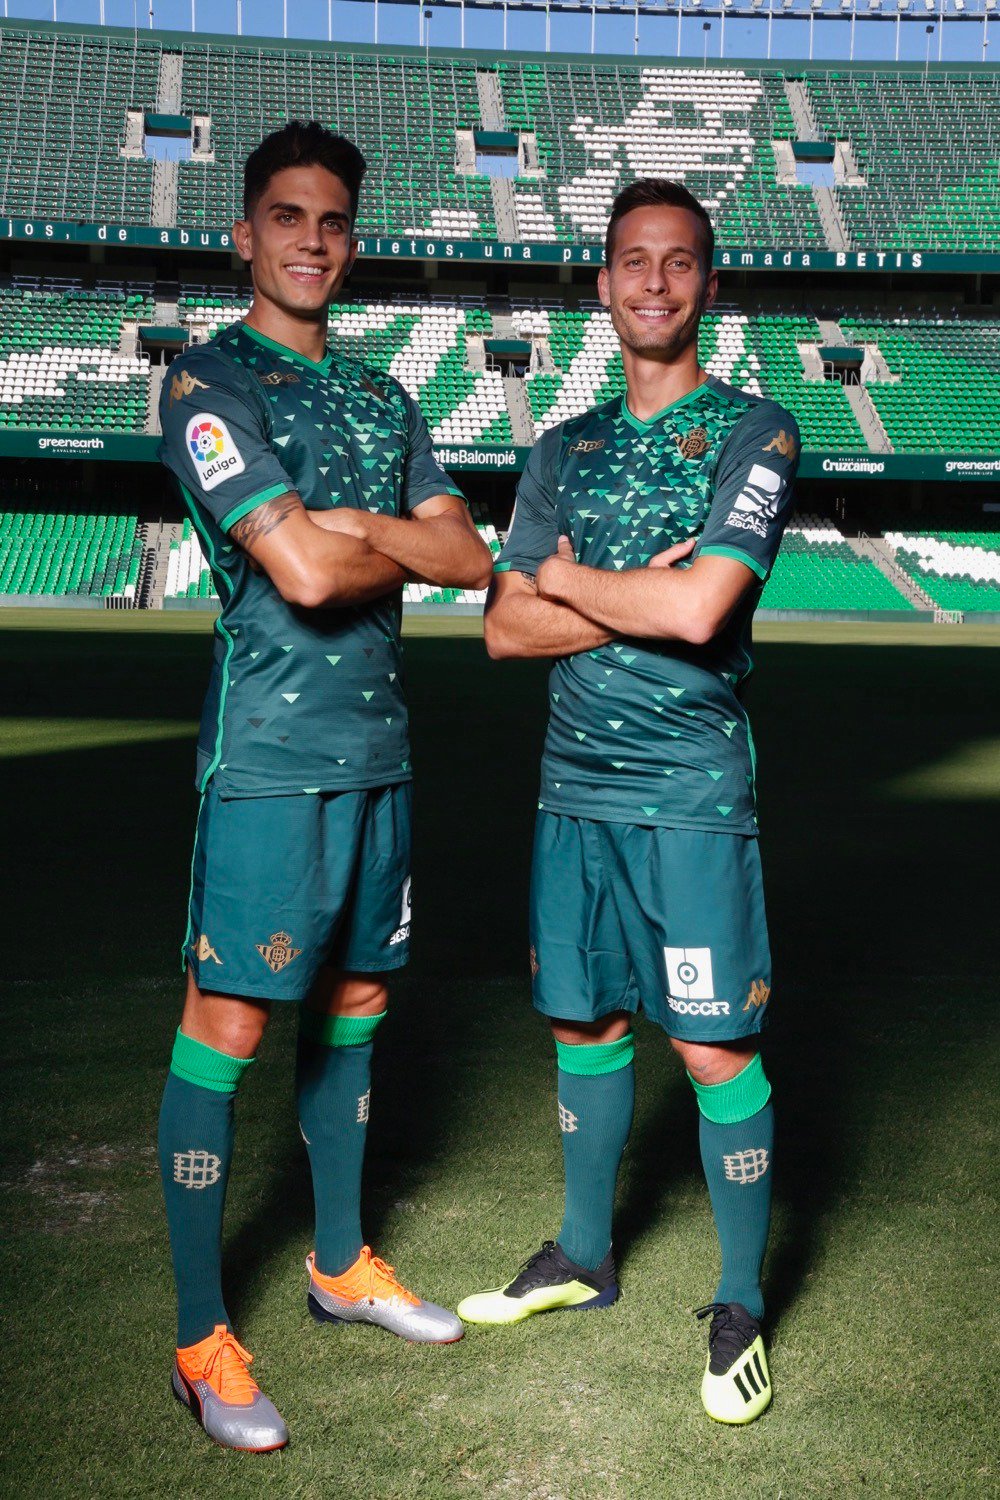 Mezquita Premedicación simplemente Real Betis Balompié on Twitter: "😍😍😍😍😍😍😍😍 #Kappa4Betis  https://t.co/11Rt8t3MpH" / Twitter